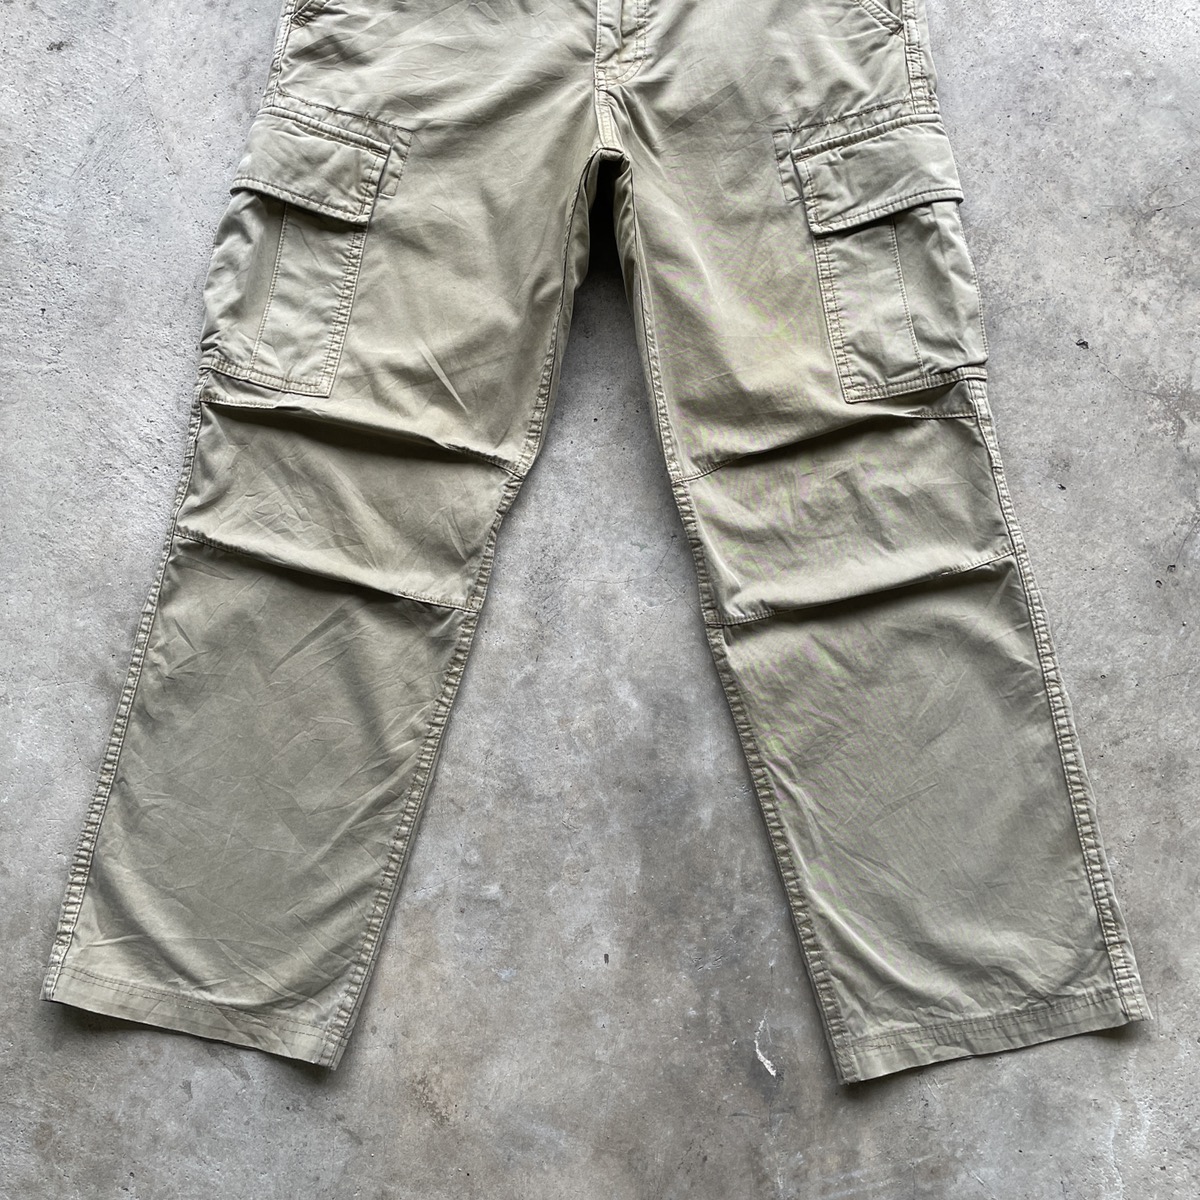 Vintage - Japanese Brand Faded Multipocket Tactical Cargo Pants W33x28 - 6